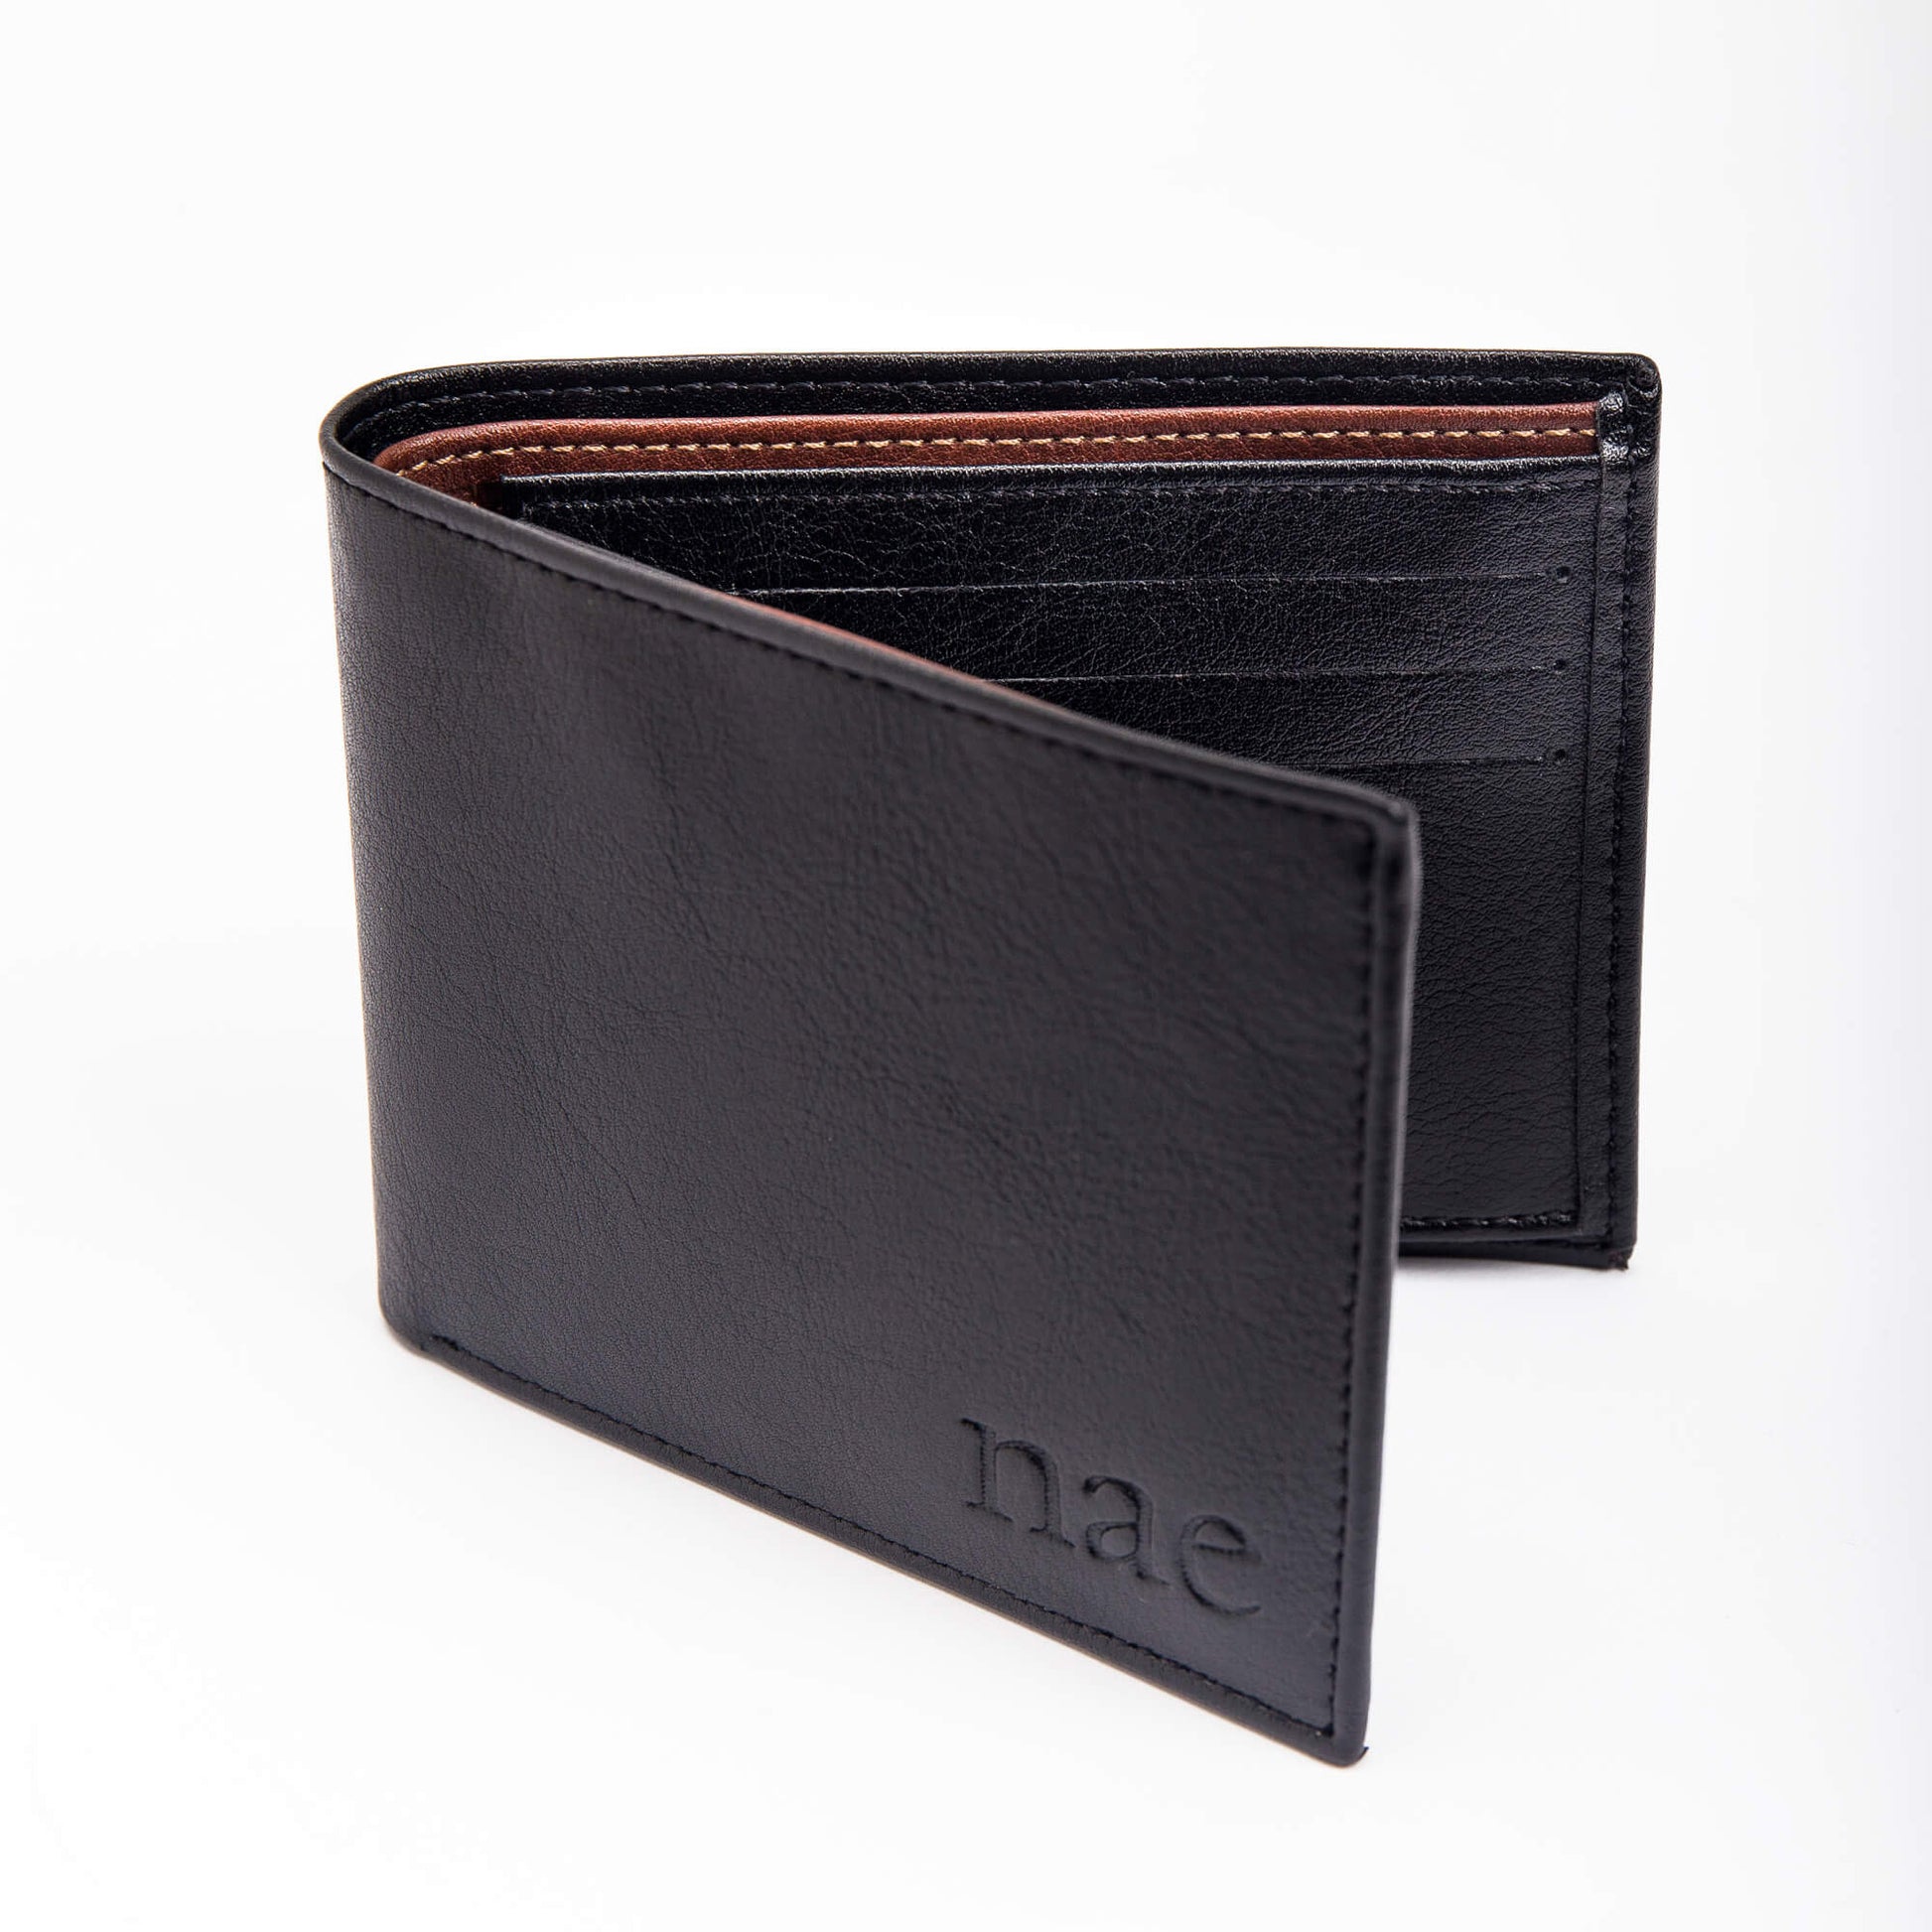 Moscow Black vegan trifold wallet